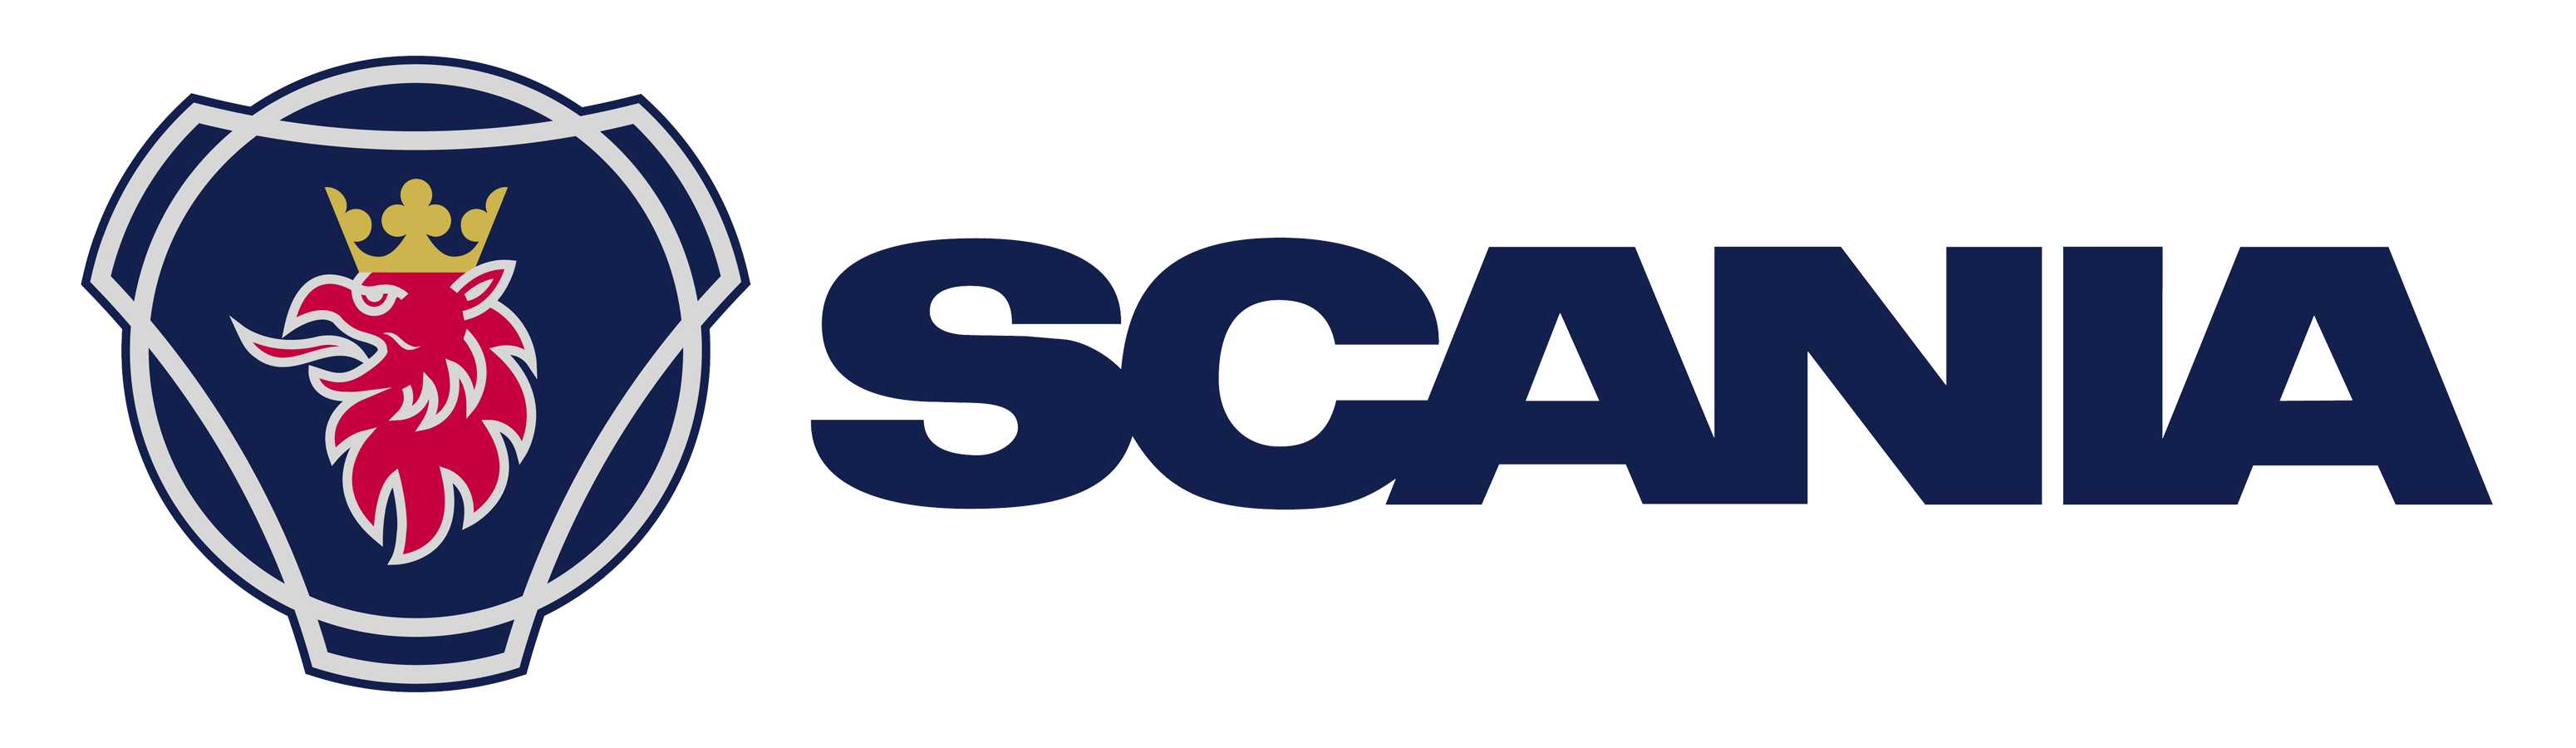 Scania Truck Logo - Scania Logo, HD Png, Meaning, Information